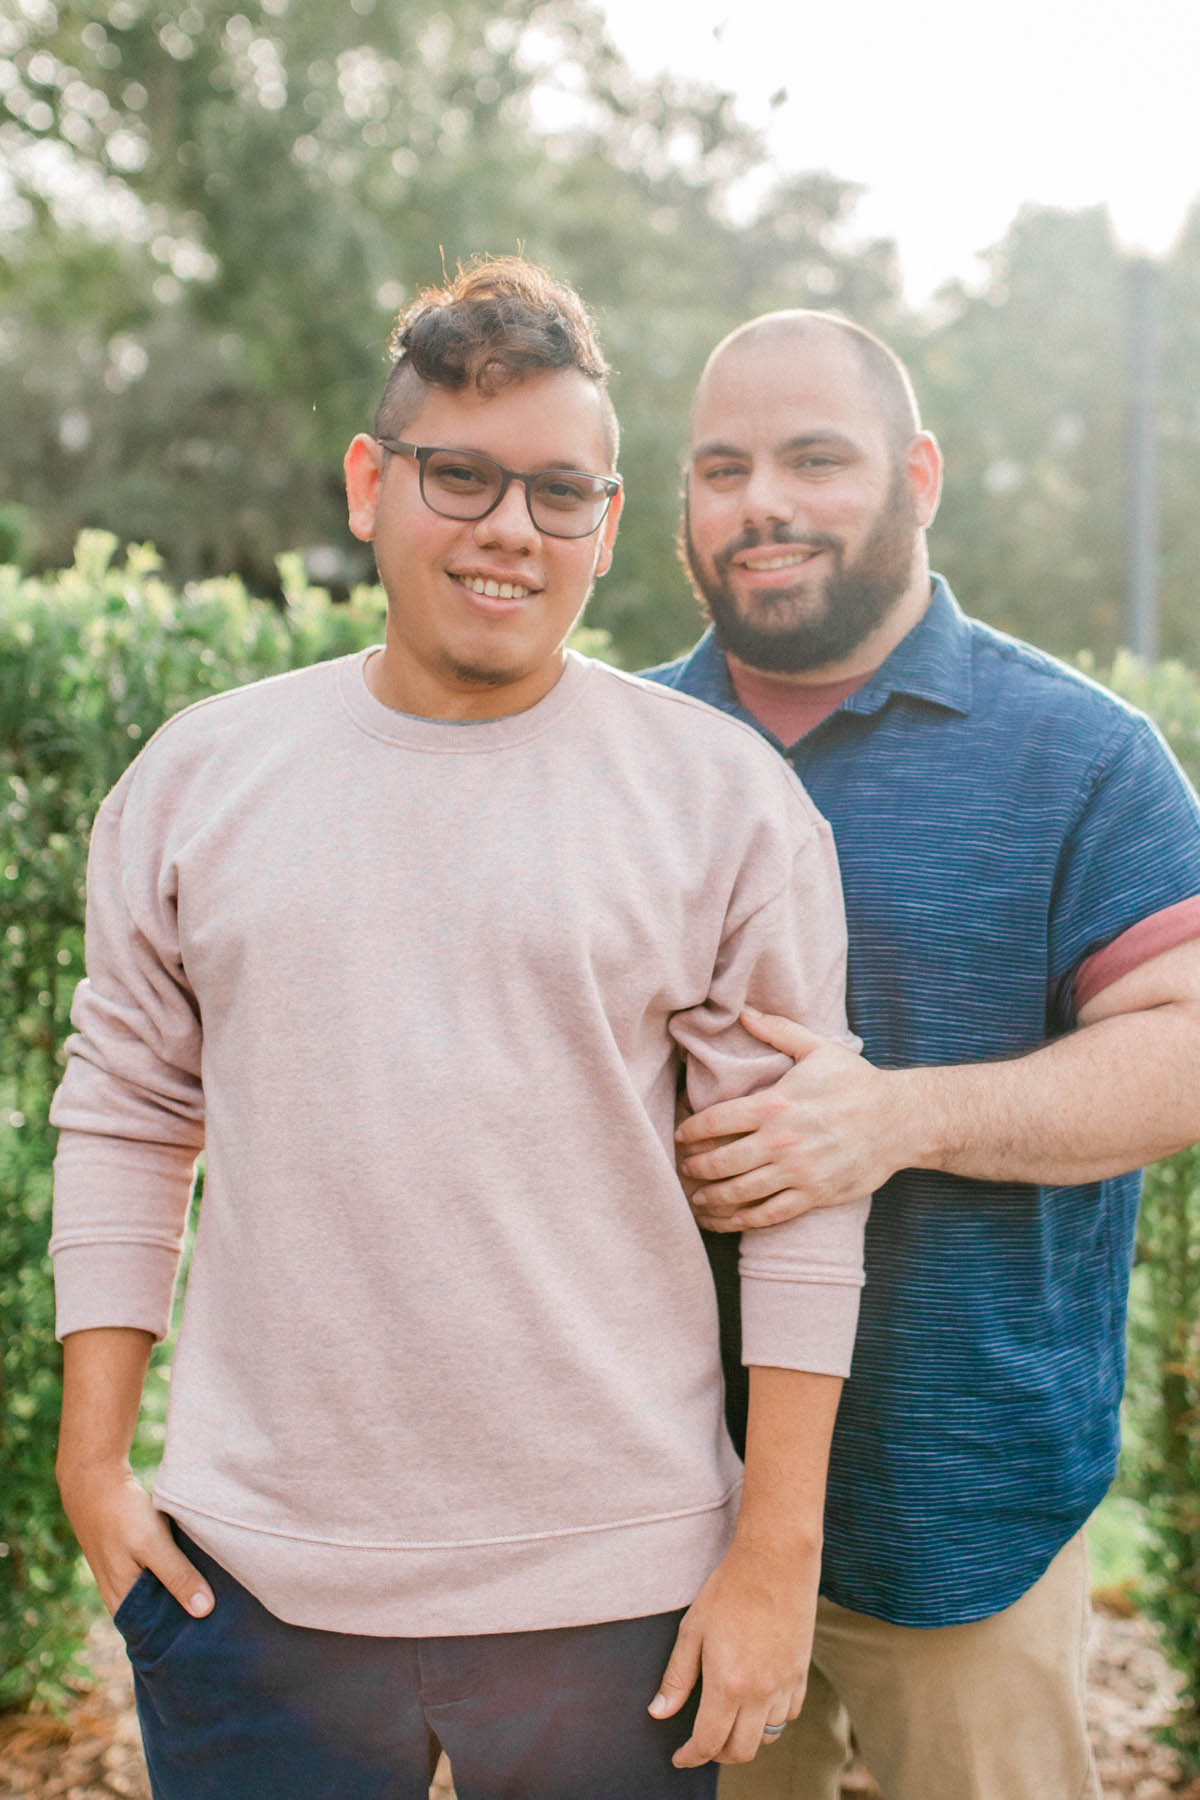 Two engaged men stand in an open garden. One is wearing a pink sweater, the other wearing a blue shirt. They are smiling directly at the camera. 